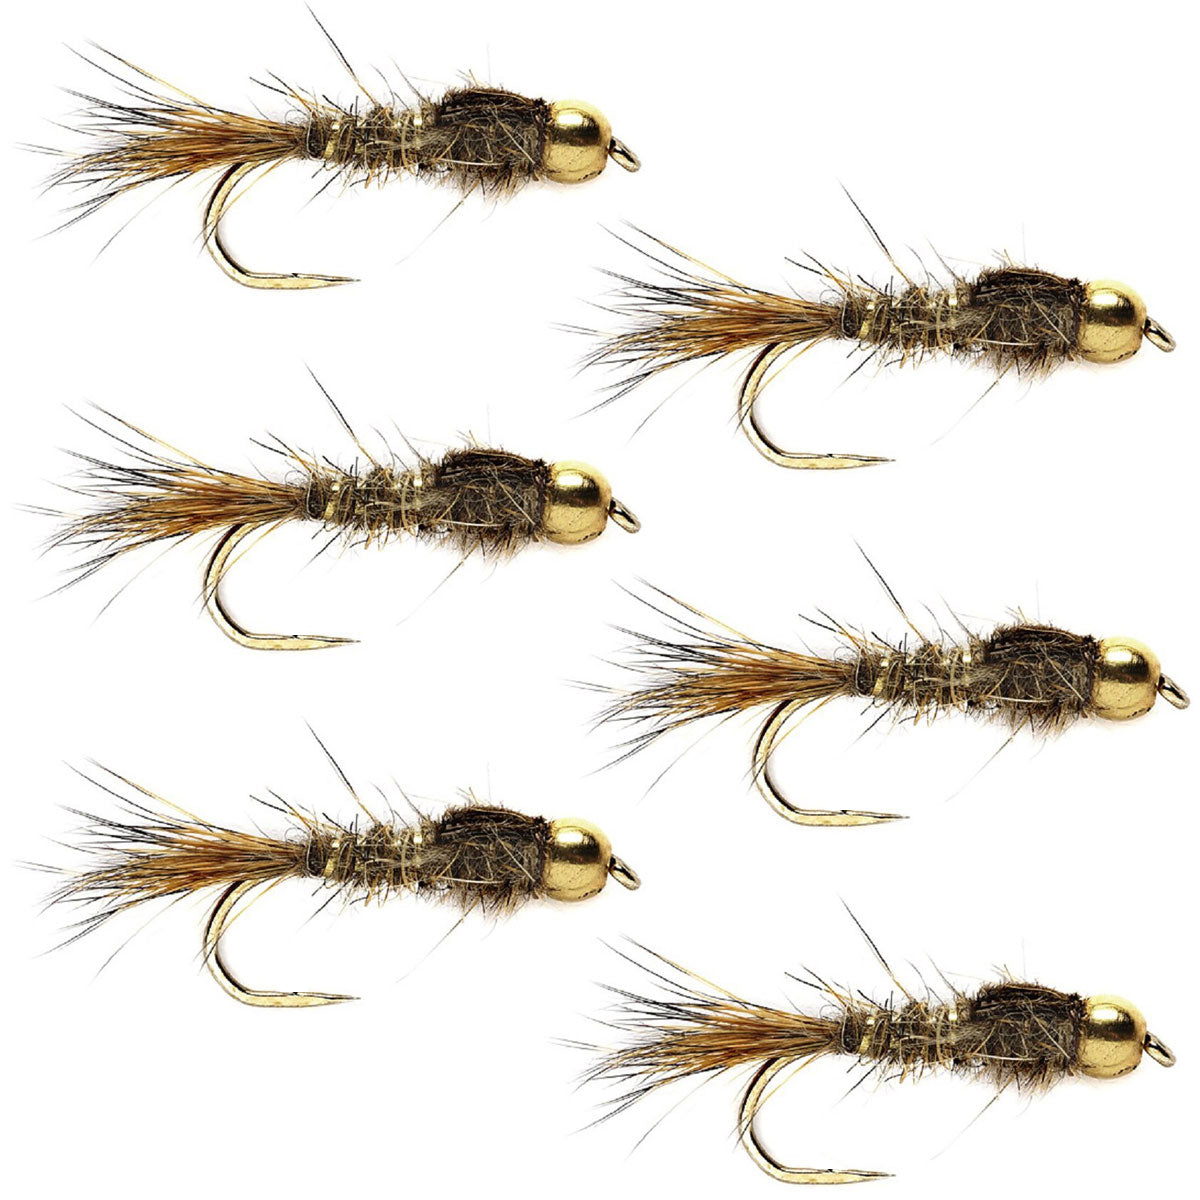 Barbless Bead Head Gold Ribbed Hare's Ear Nymph 6 Flies Hook Size 10